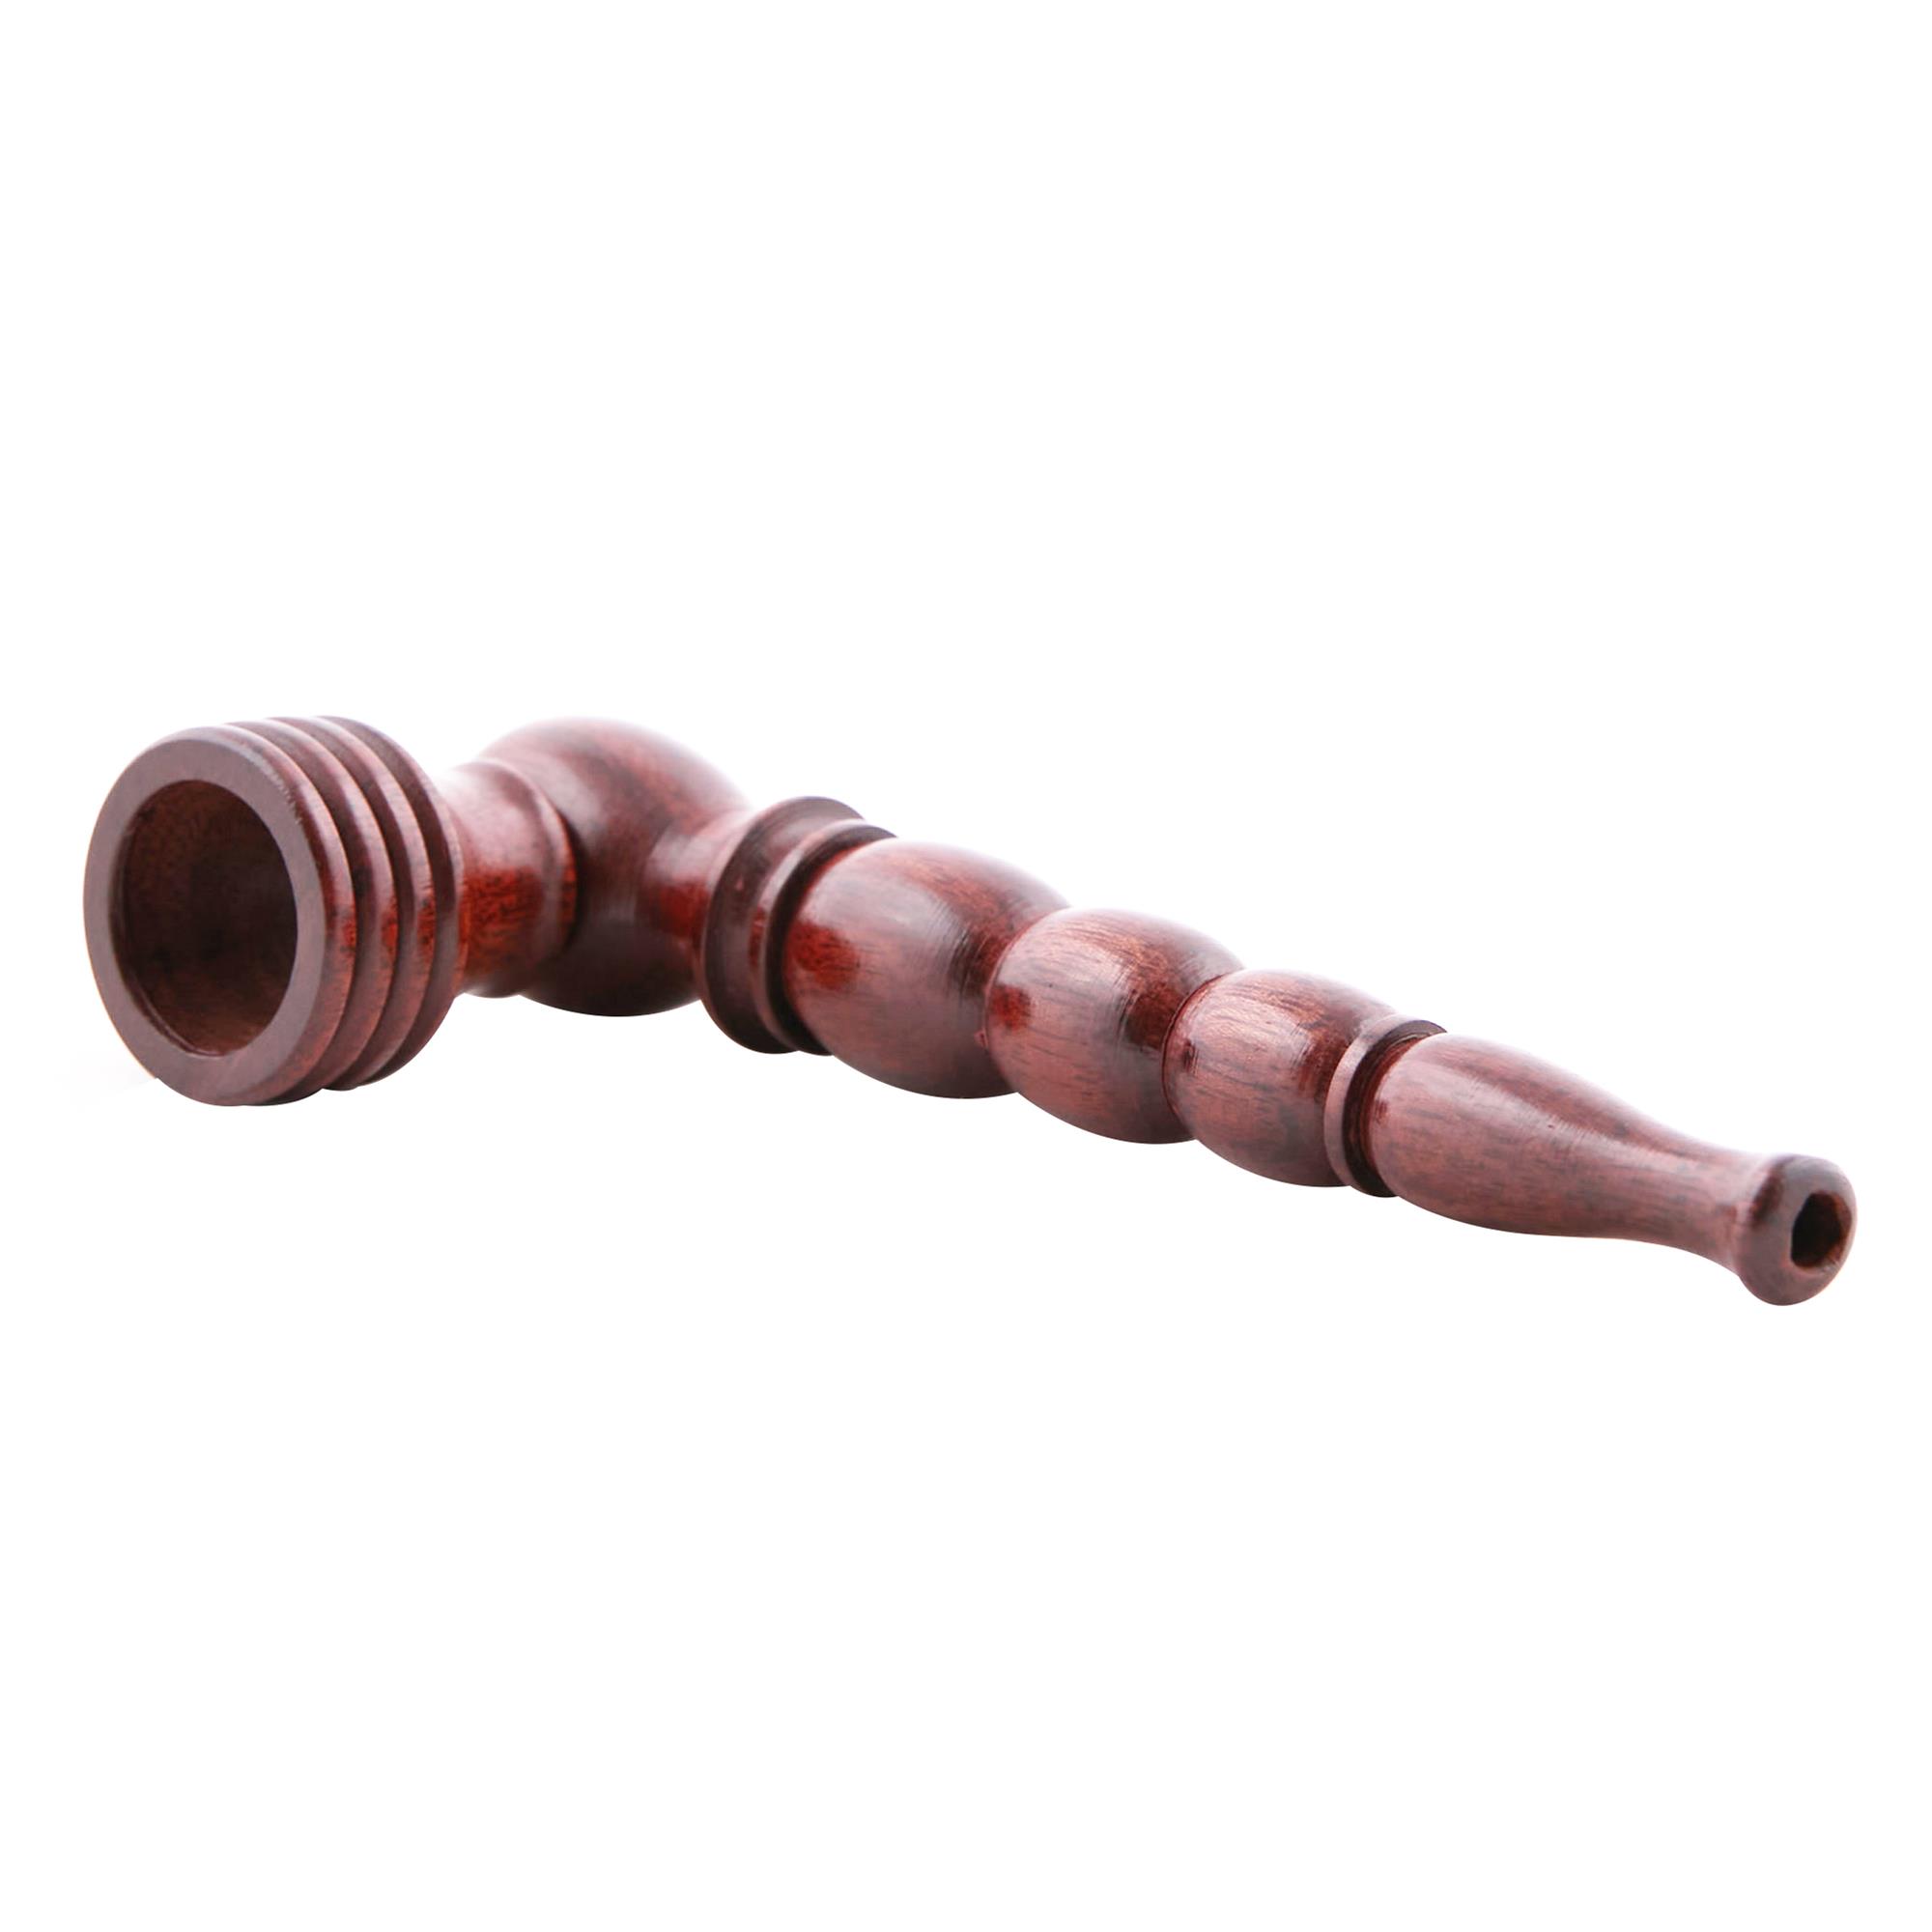 PECAN HICKORY WOOD PIPE